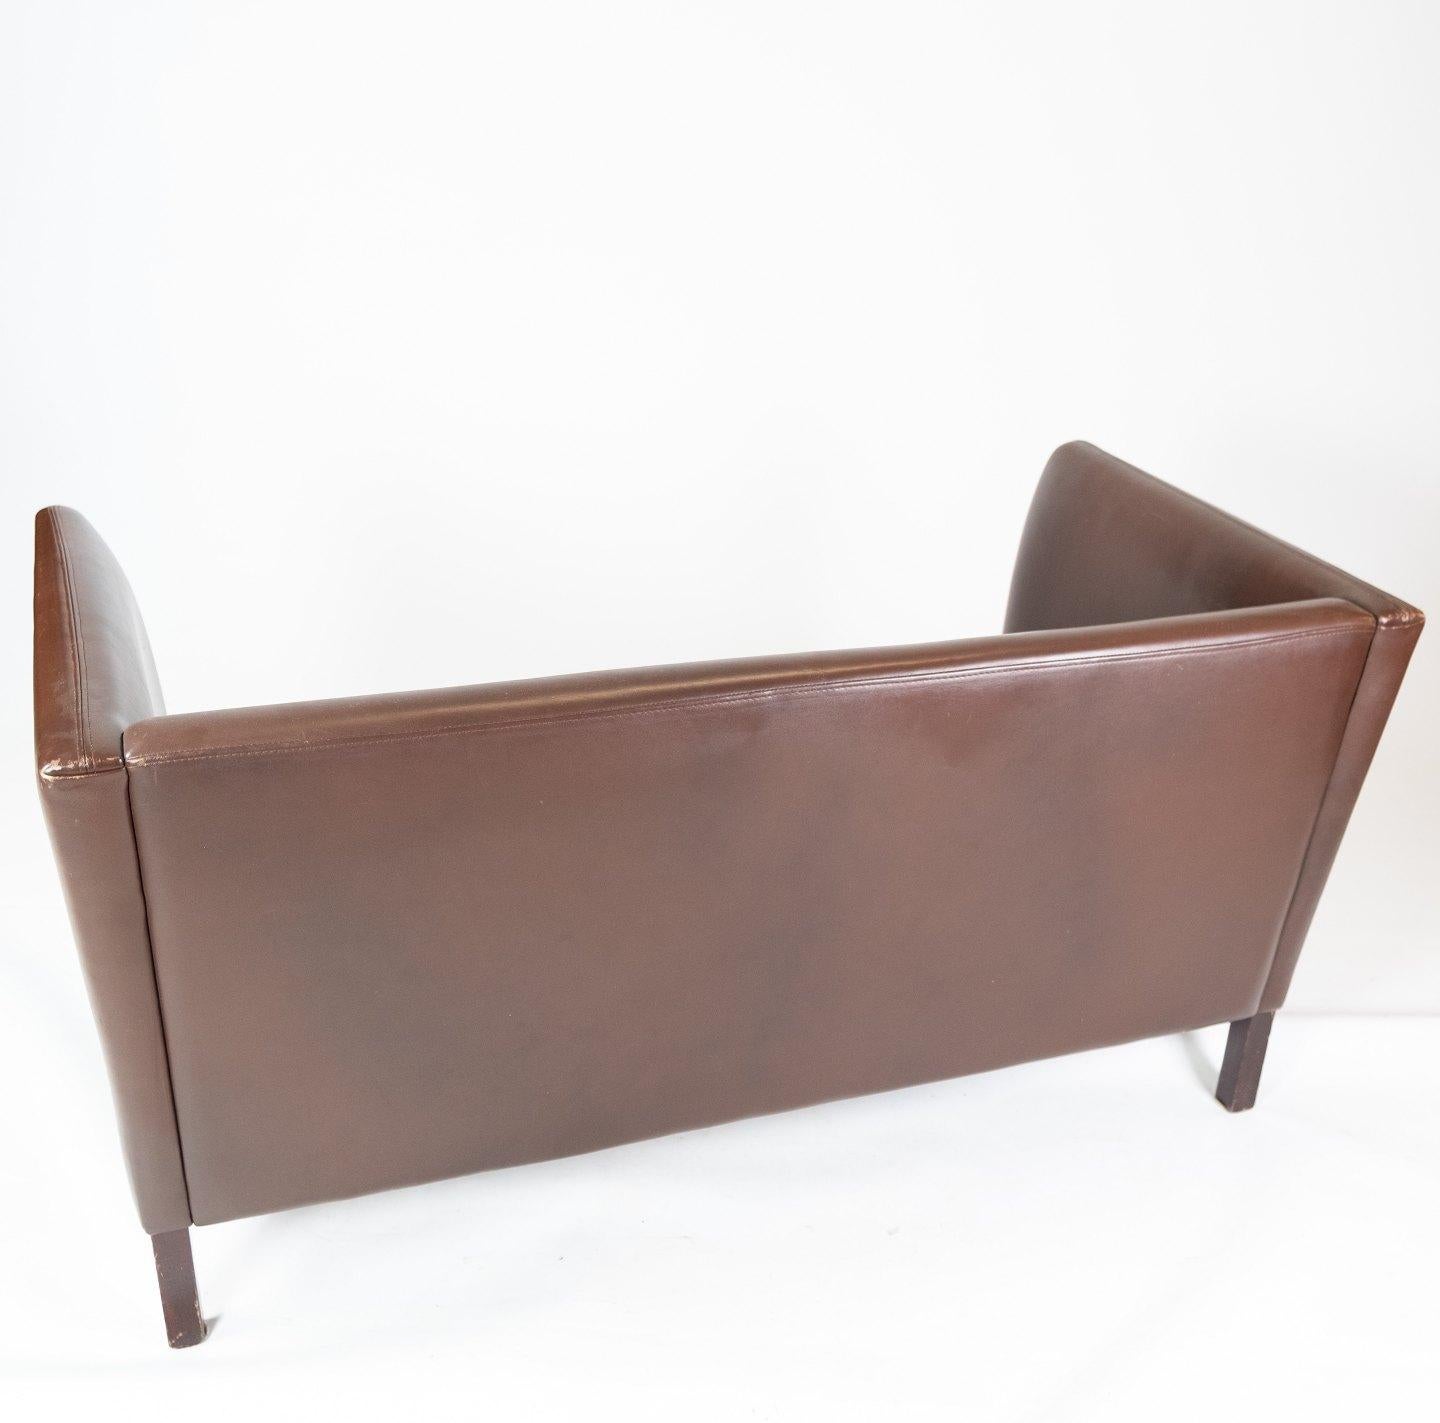 Two Seater Sofa Upholstered with Dark Brown Leather of Danish Design, 1960s For Sale 3